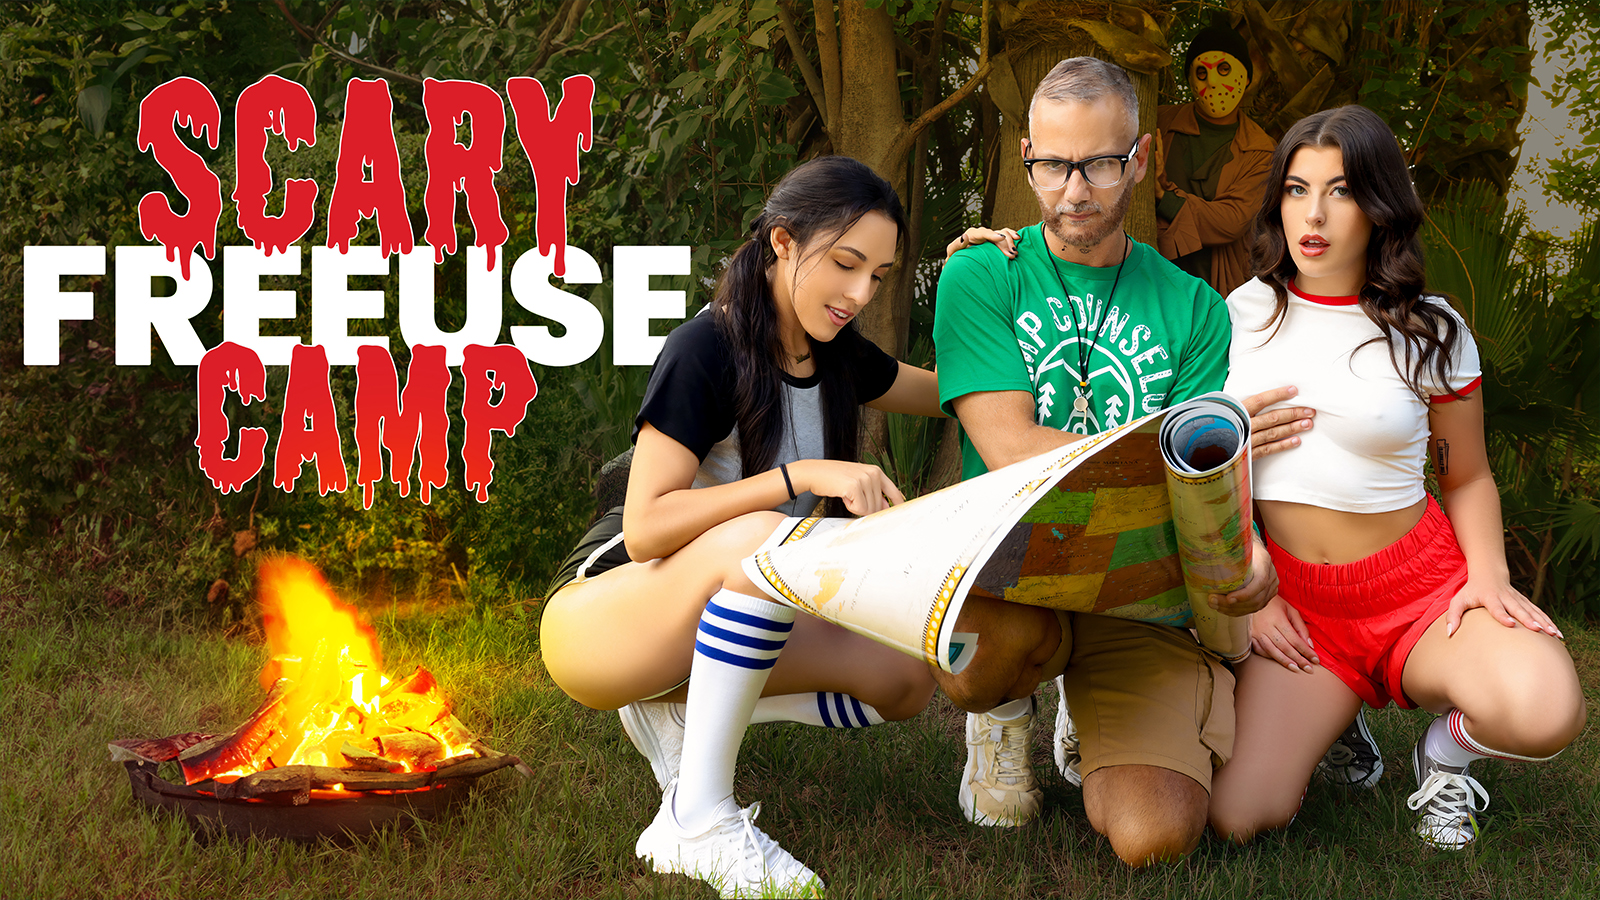 FreeuseFantasy Selena Ivy, Gal Ritchie – Scary Freeuse Camp